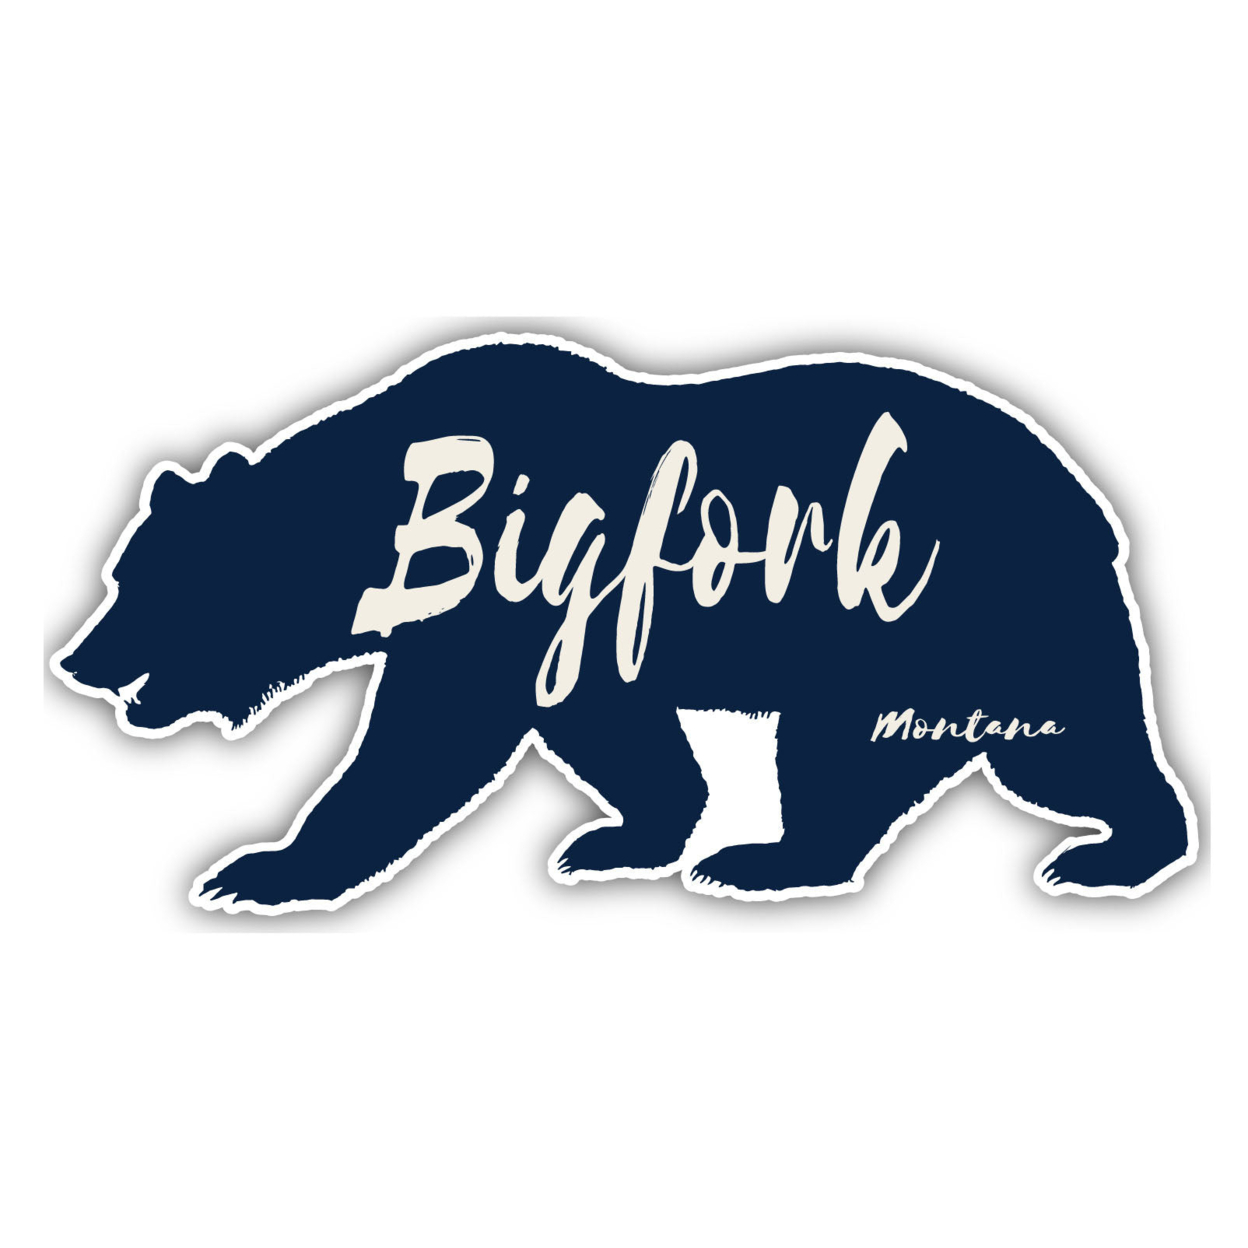 Bigfork Montana Souvenir Decorative Stickers (Choose Theme And Size) - 4-Pack, 4-Inch, Great Outdoors